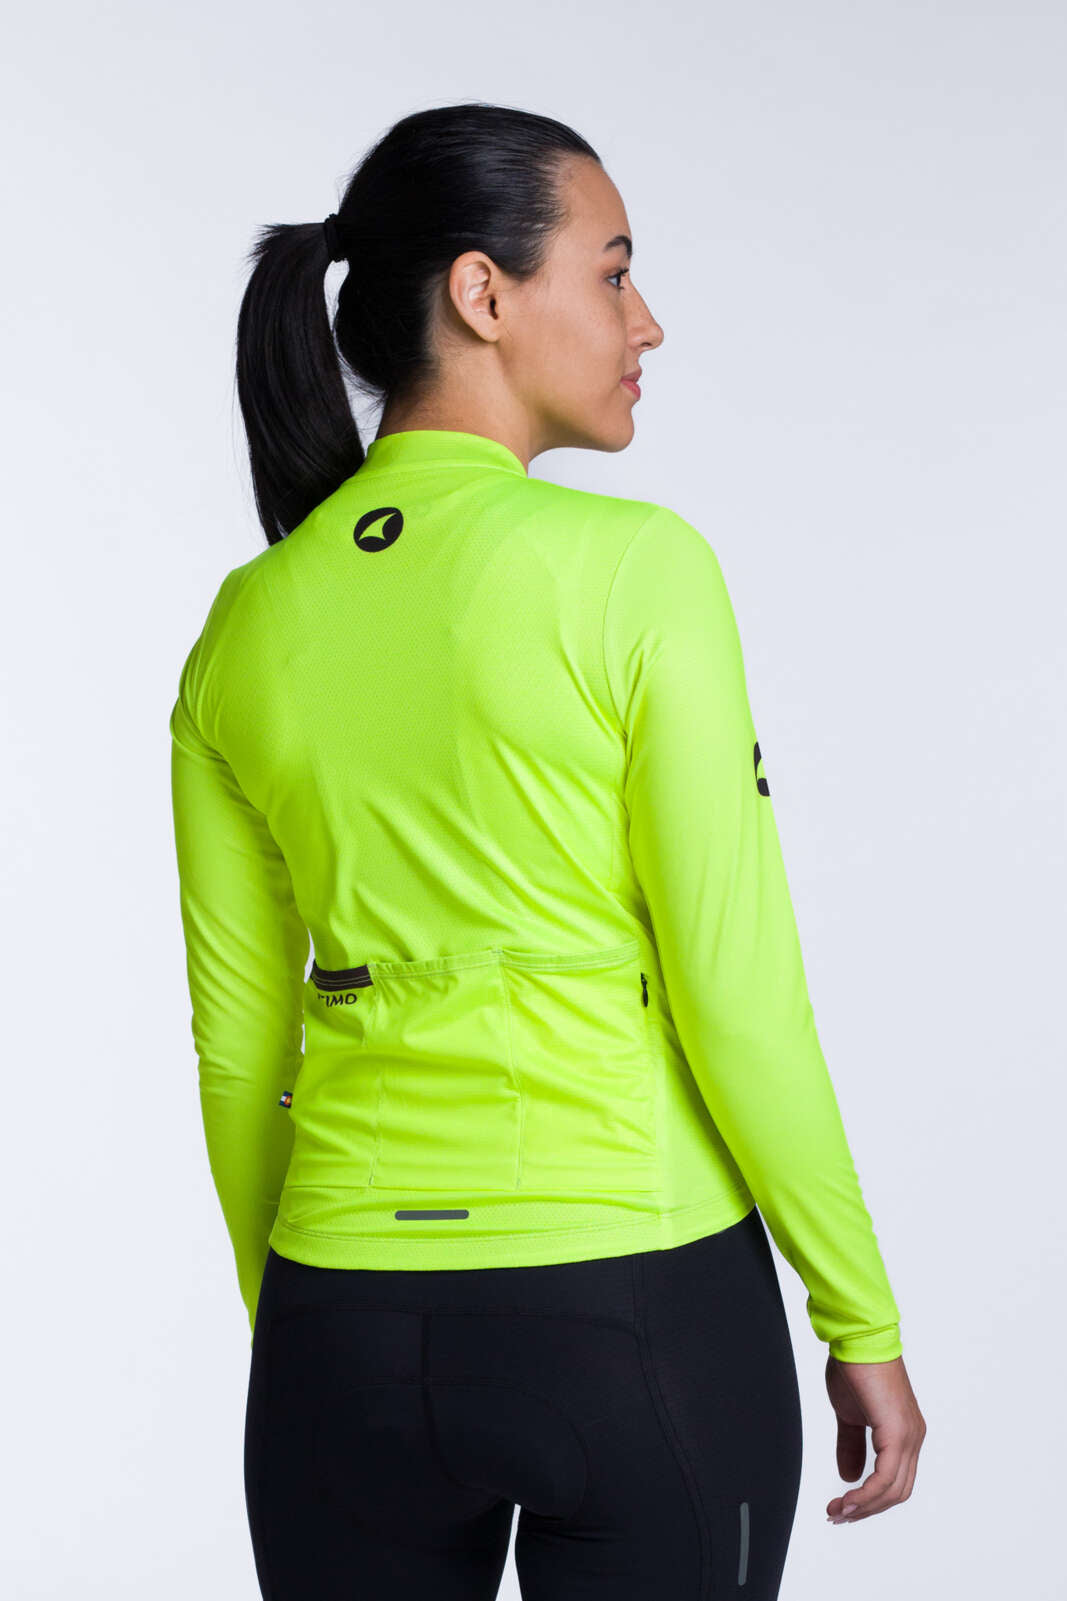 Women's High-Viz Yellow Long Sleeve Cycling Jersey - Ascent Back View #color_manic